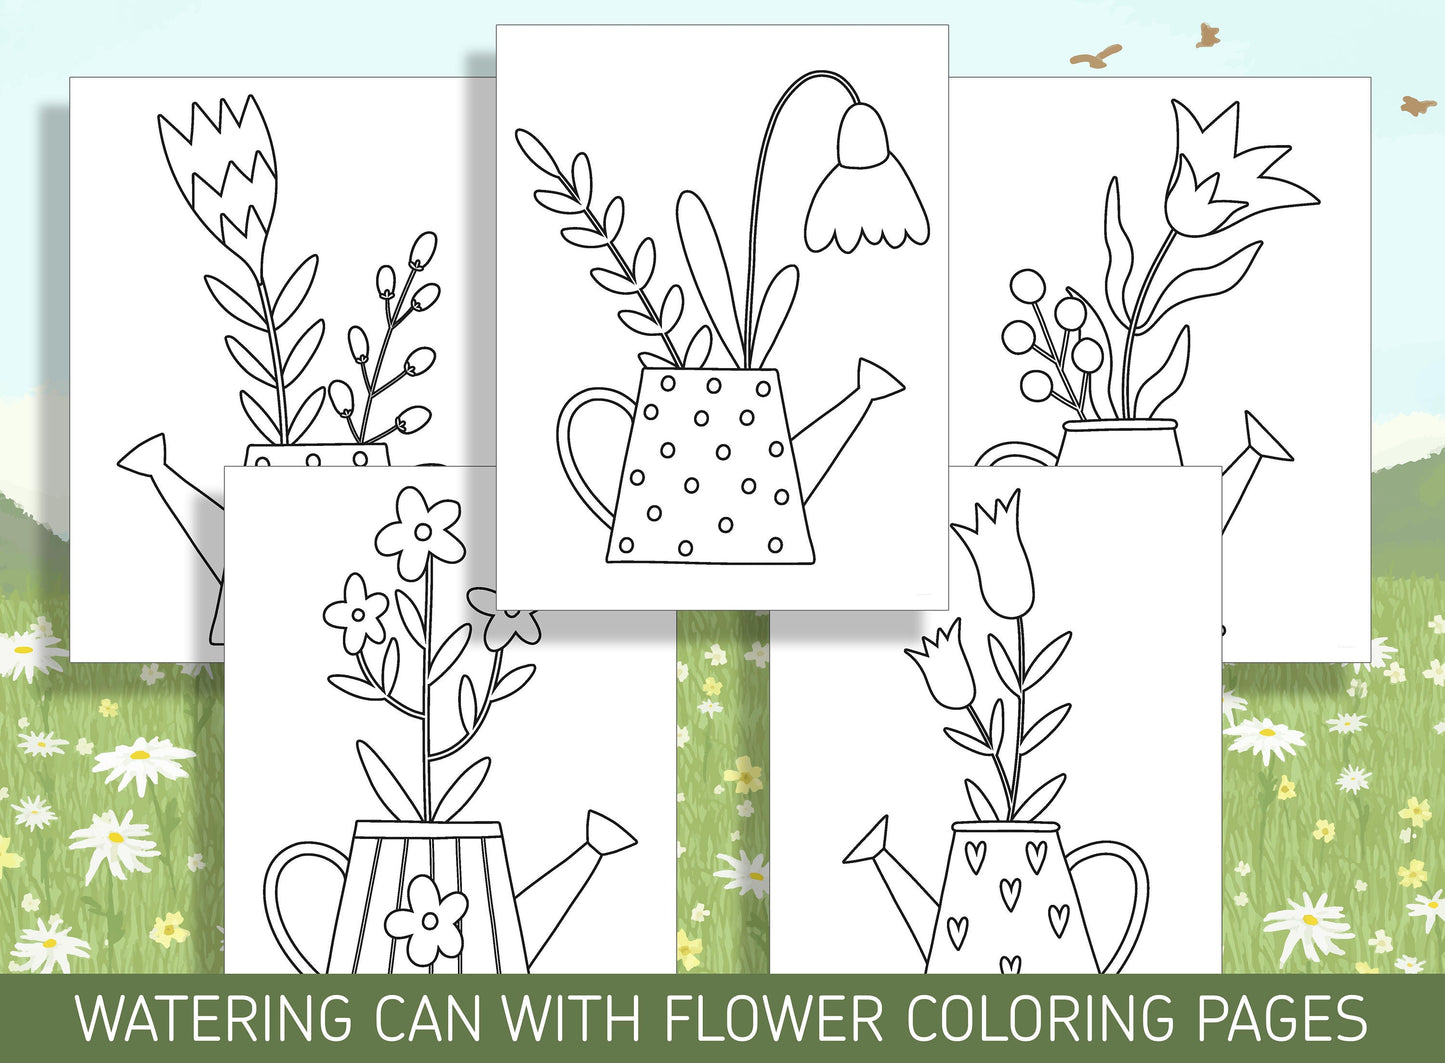 15 Beautiful Watering Can with Flower Coloring Pages for a Relaxing Activity, PDF File, Instant Download